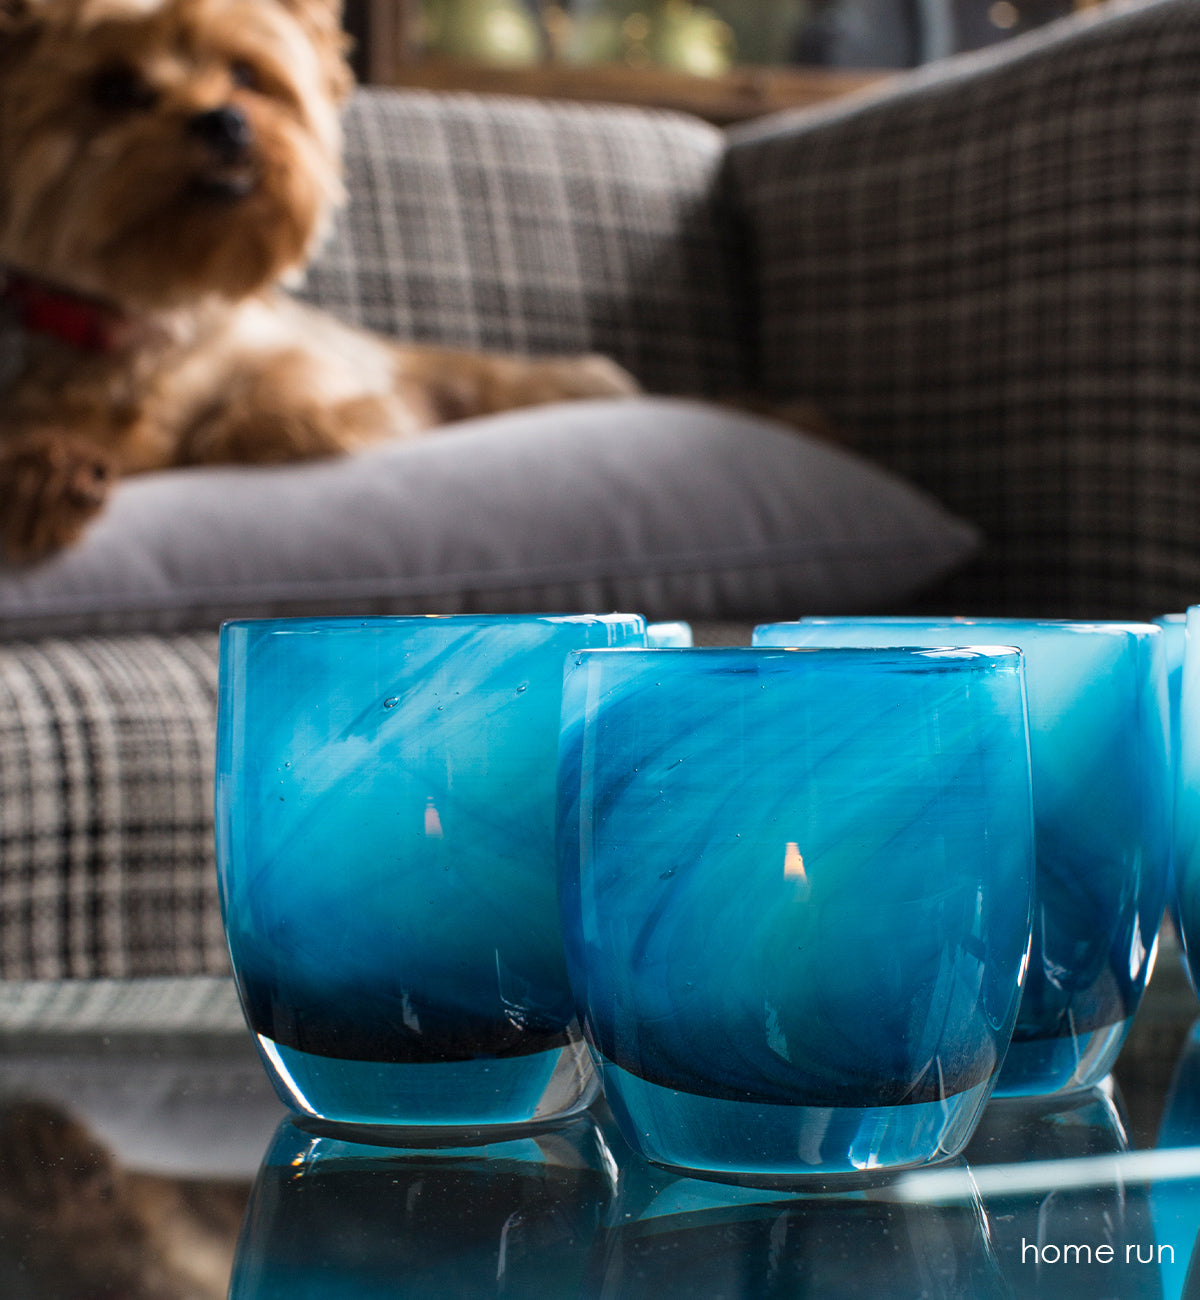 home run blue swirl, hand-blown glass votive candle holder. On a coffe table next to a small dog on a couch.